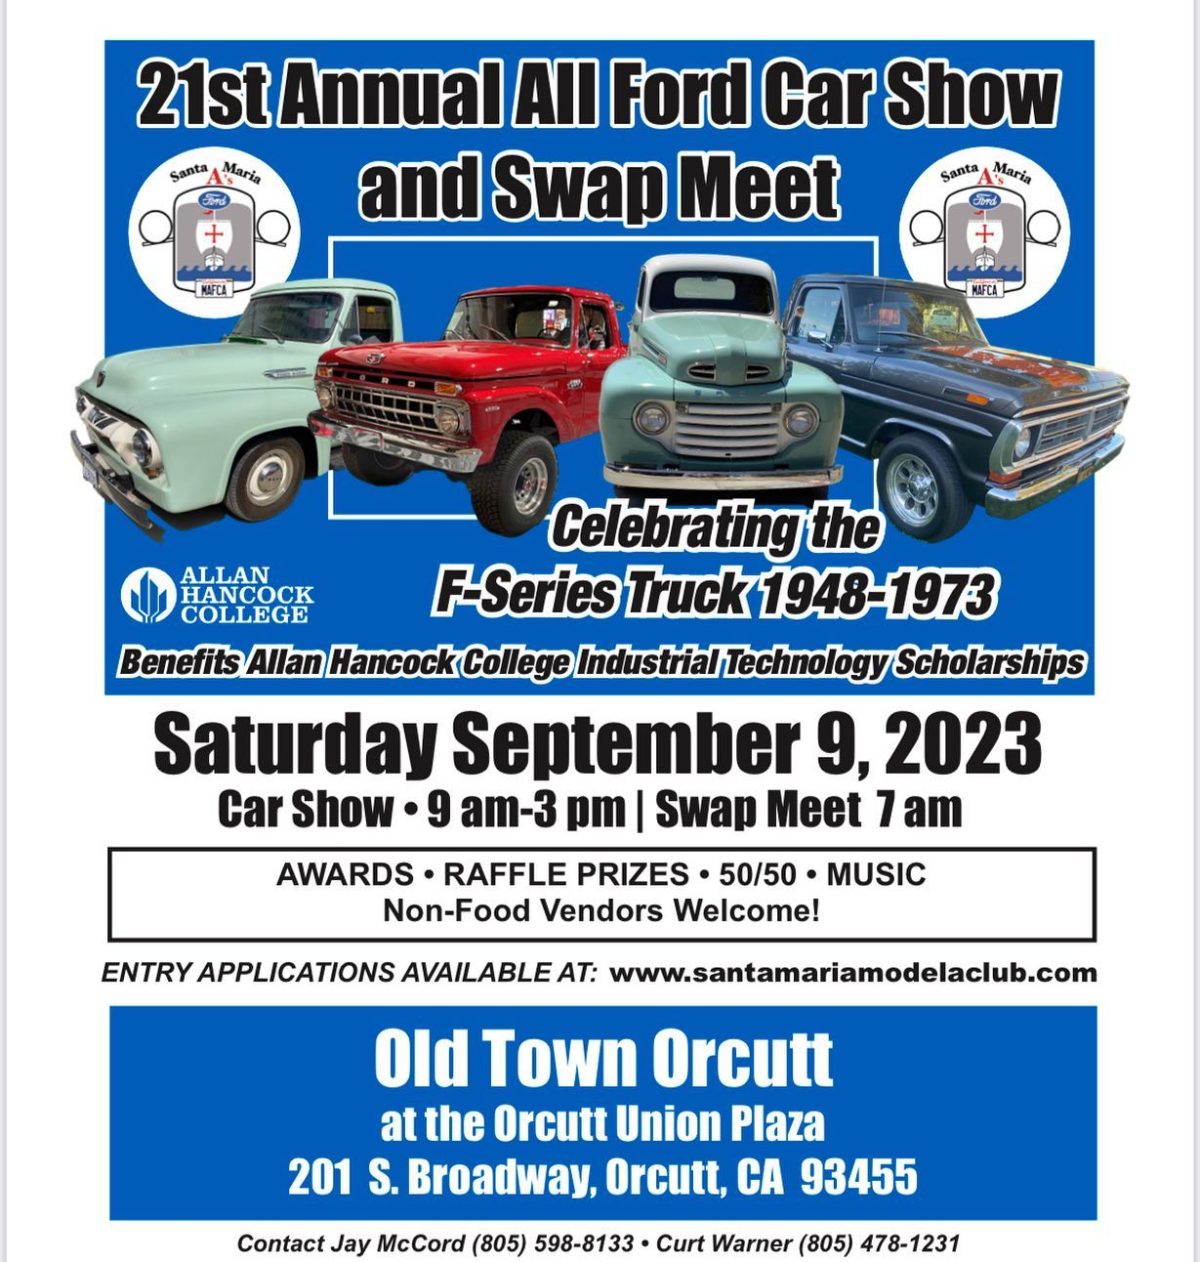 All Ford Car Show and Swap Meet